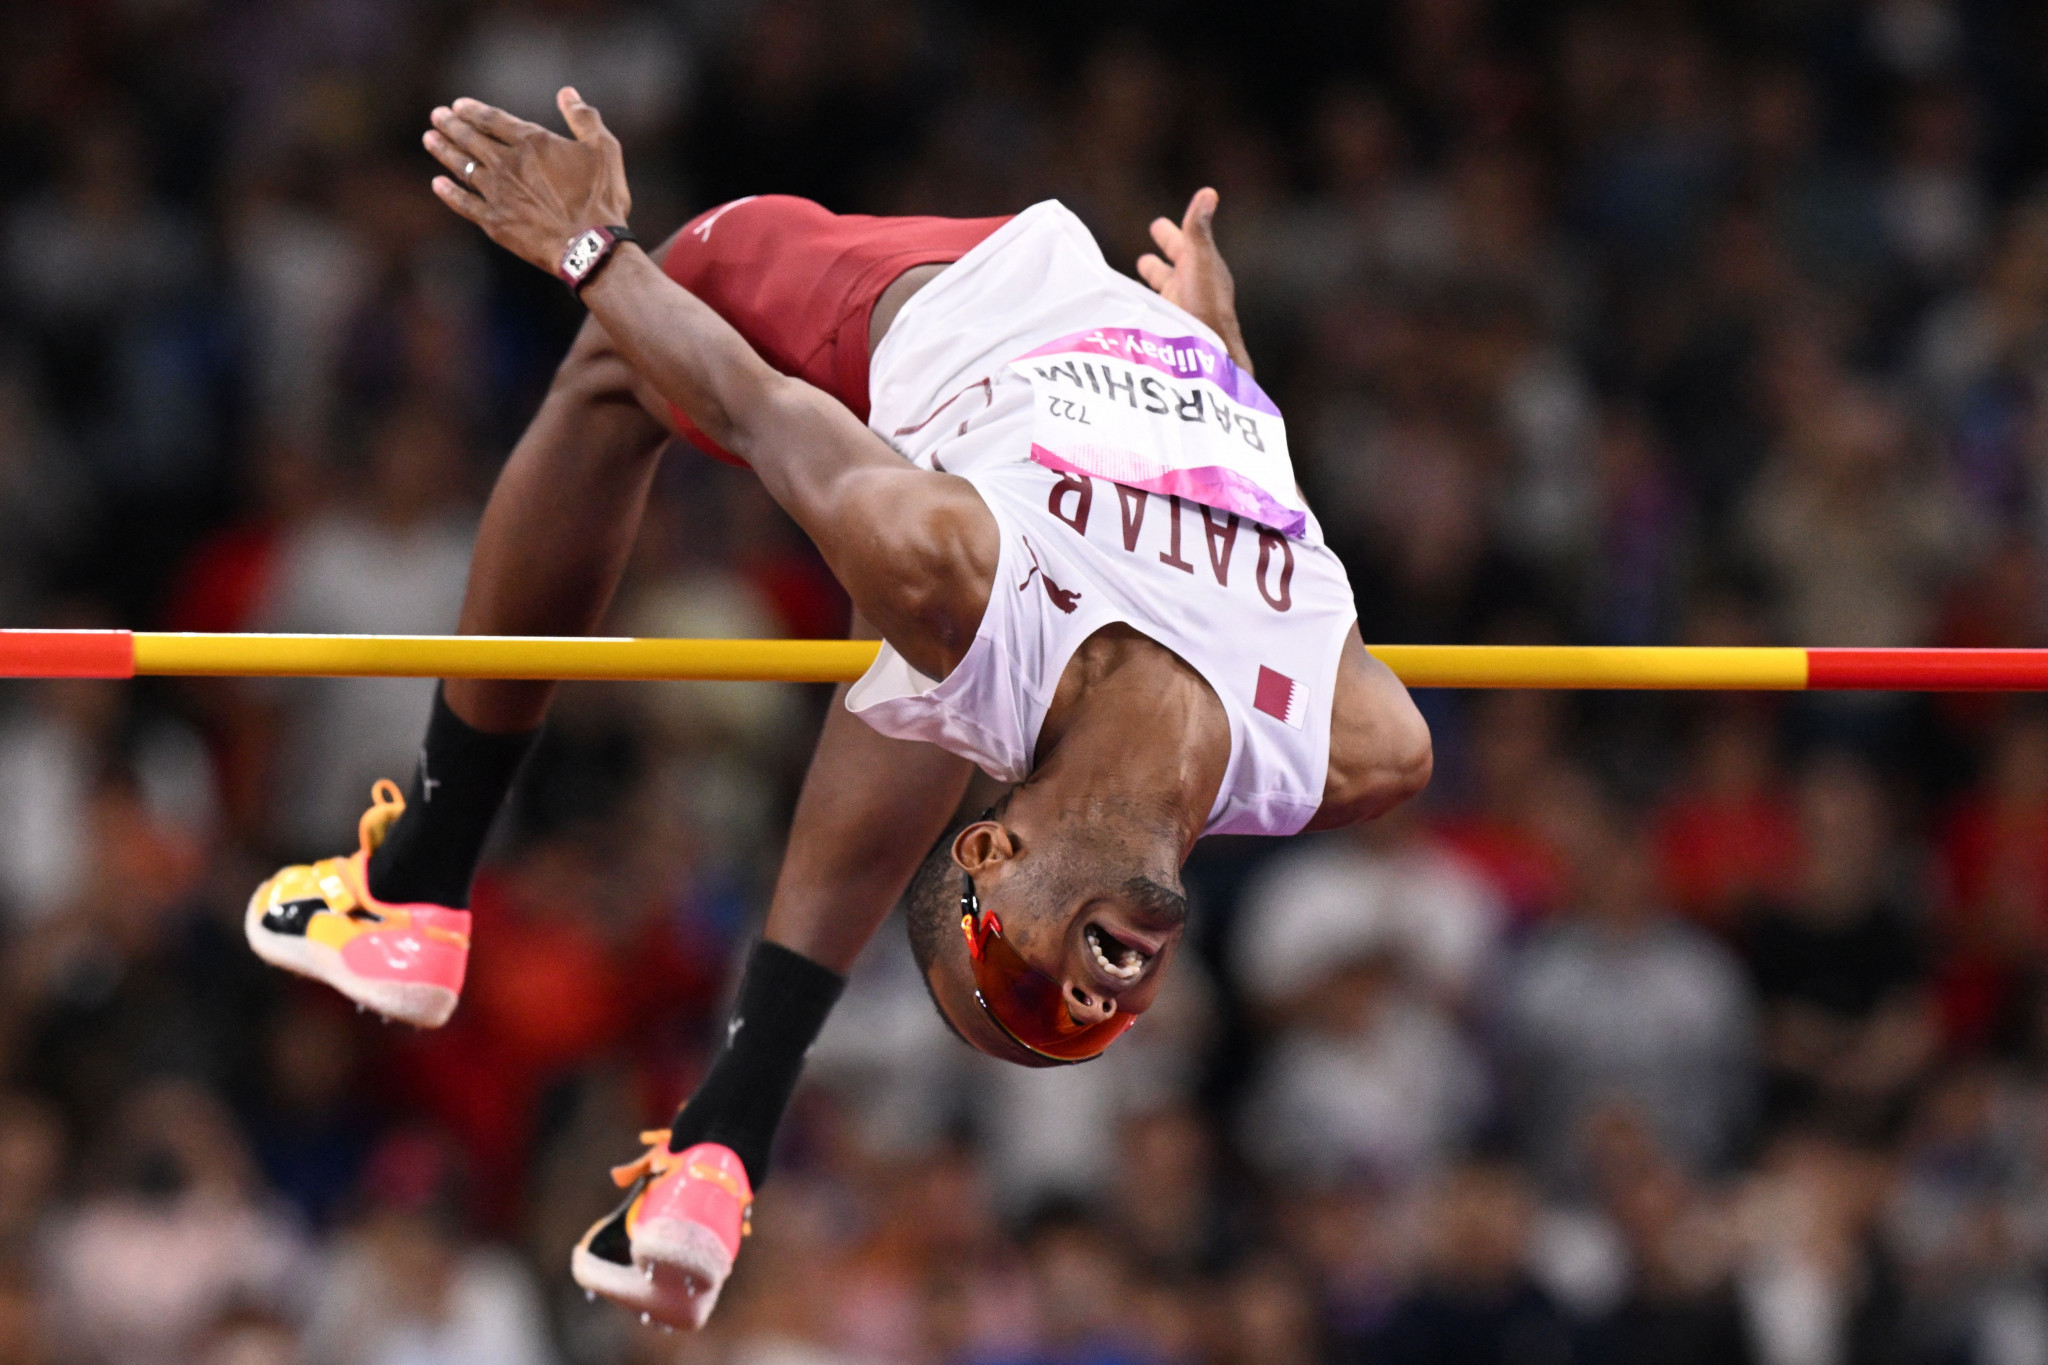 Qatar's Mutaz Barshim equalled his own Asian Games record to win high jump gold after clearing 2.35 metres ©Getty Images